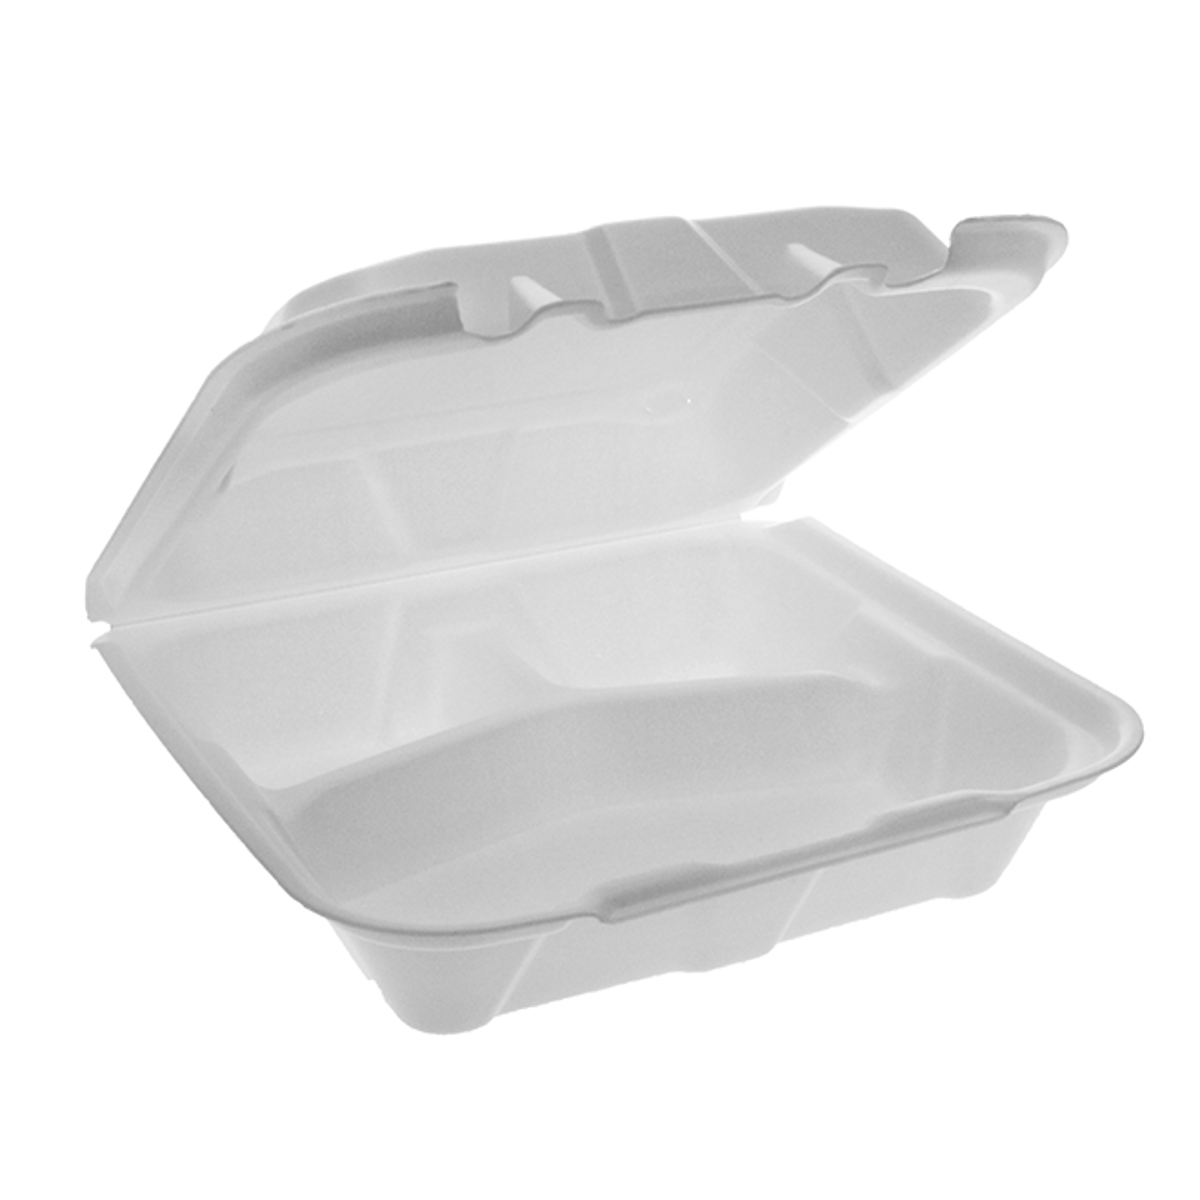 Foam Tray, Three Compartment, Hinged Lid